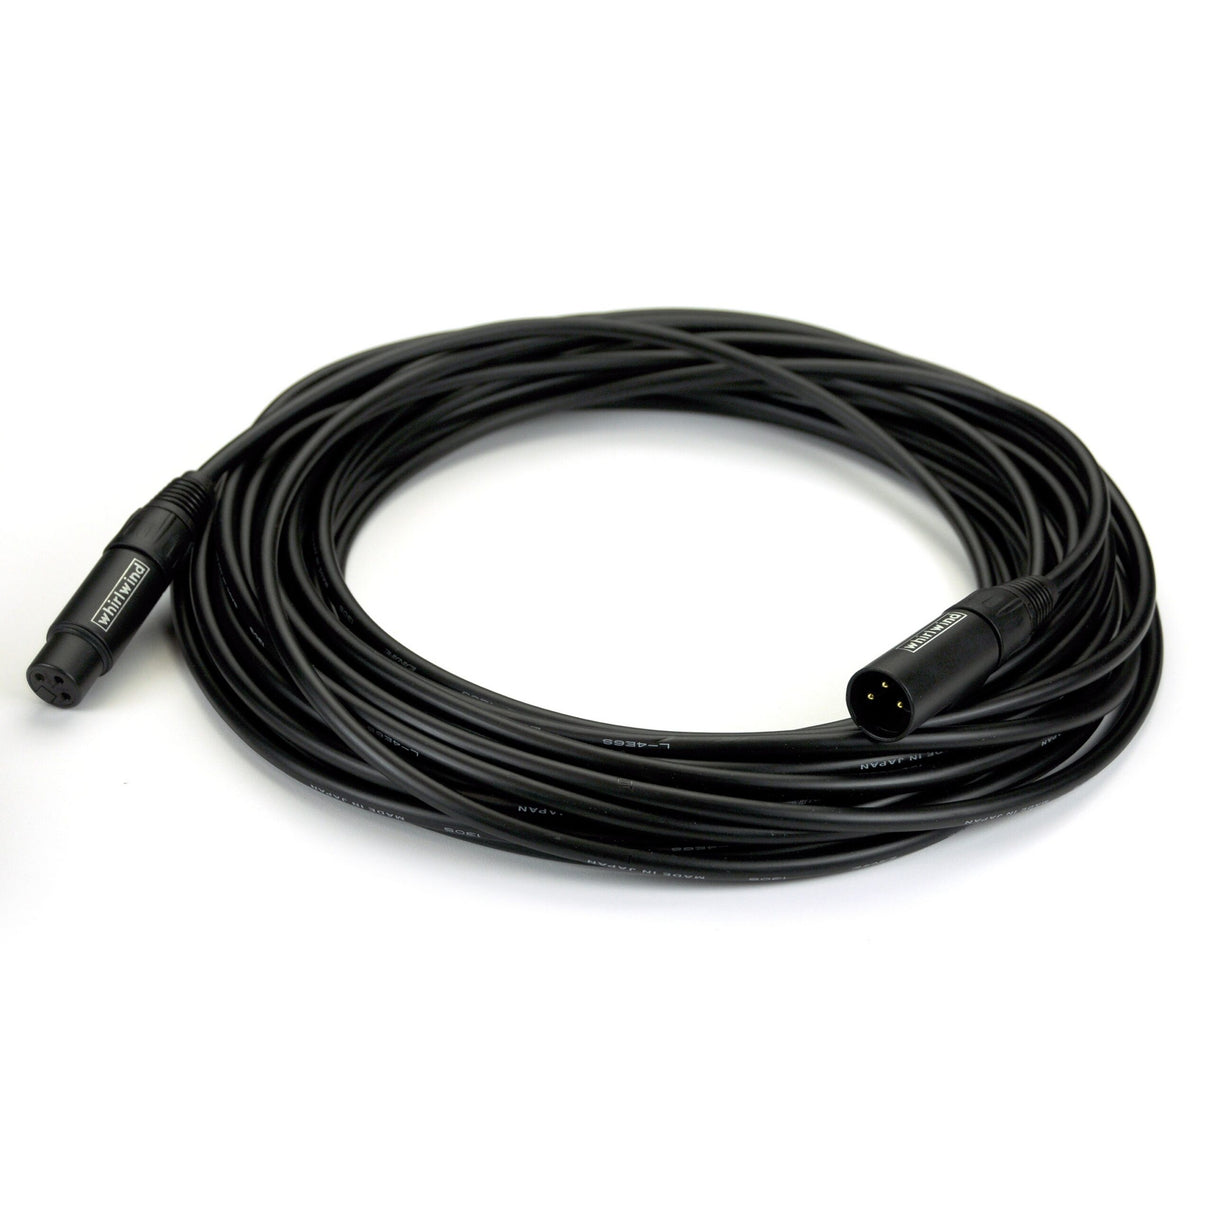 Whirlwind MKQ25 Quad XLRF to XLRM Microphone Cable, Black, 25-Feet